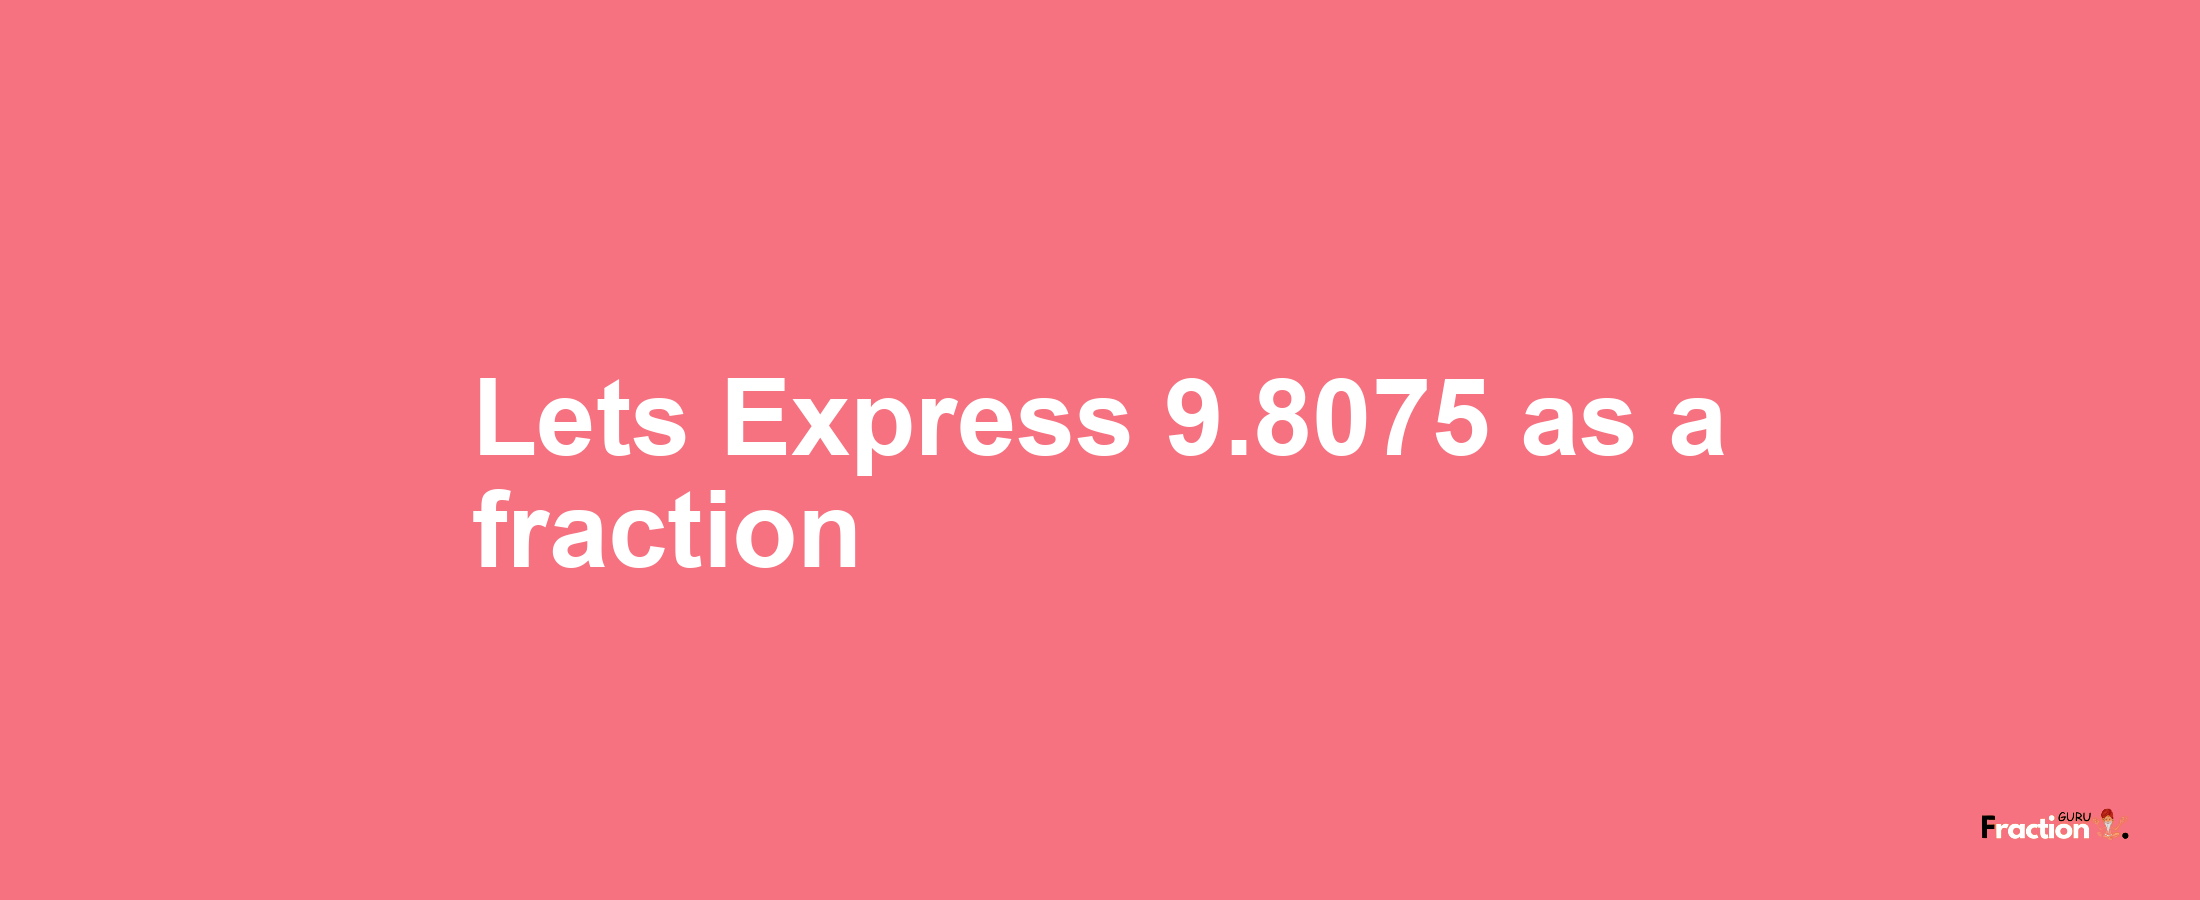 Lets Express 9.8075 as afraction